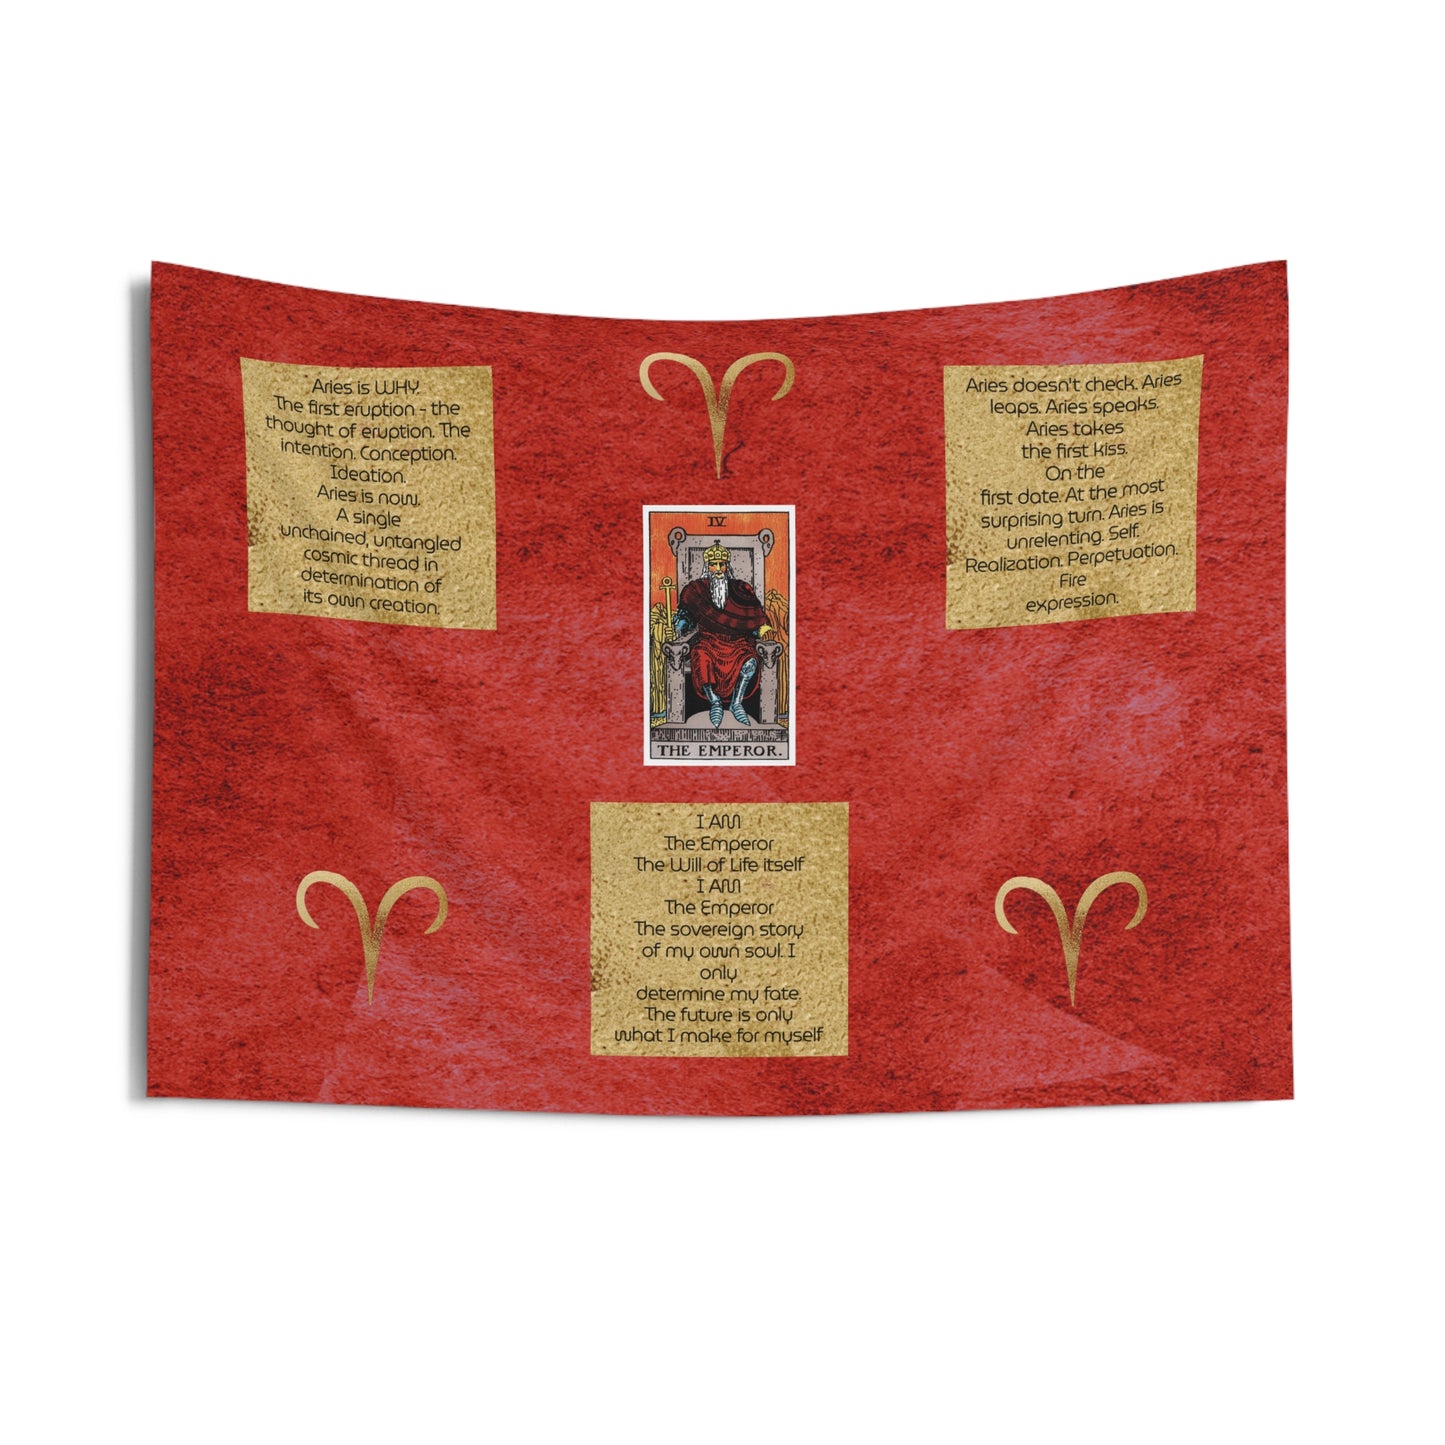 Aries Zodiac Sign Altar Cloth or Wall Tapestry With The Emperor Tarot Card and a Poem for Chanting, Incantation and Affirmation